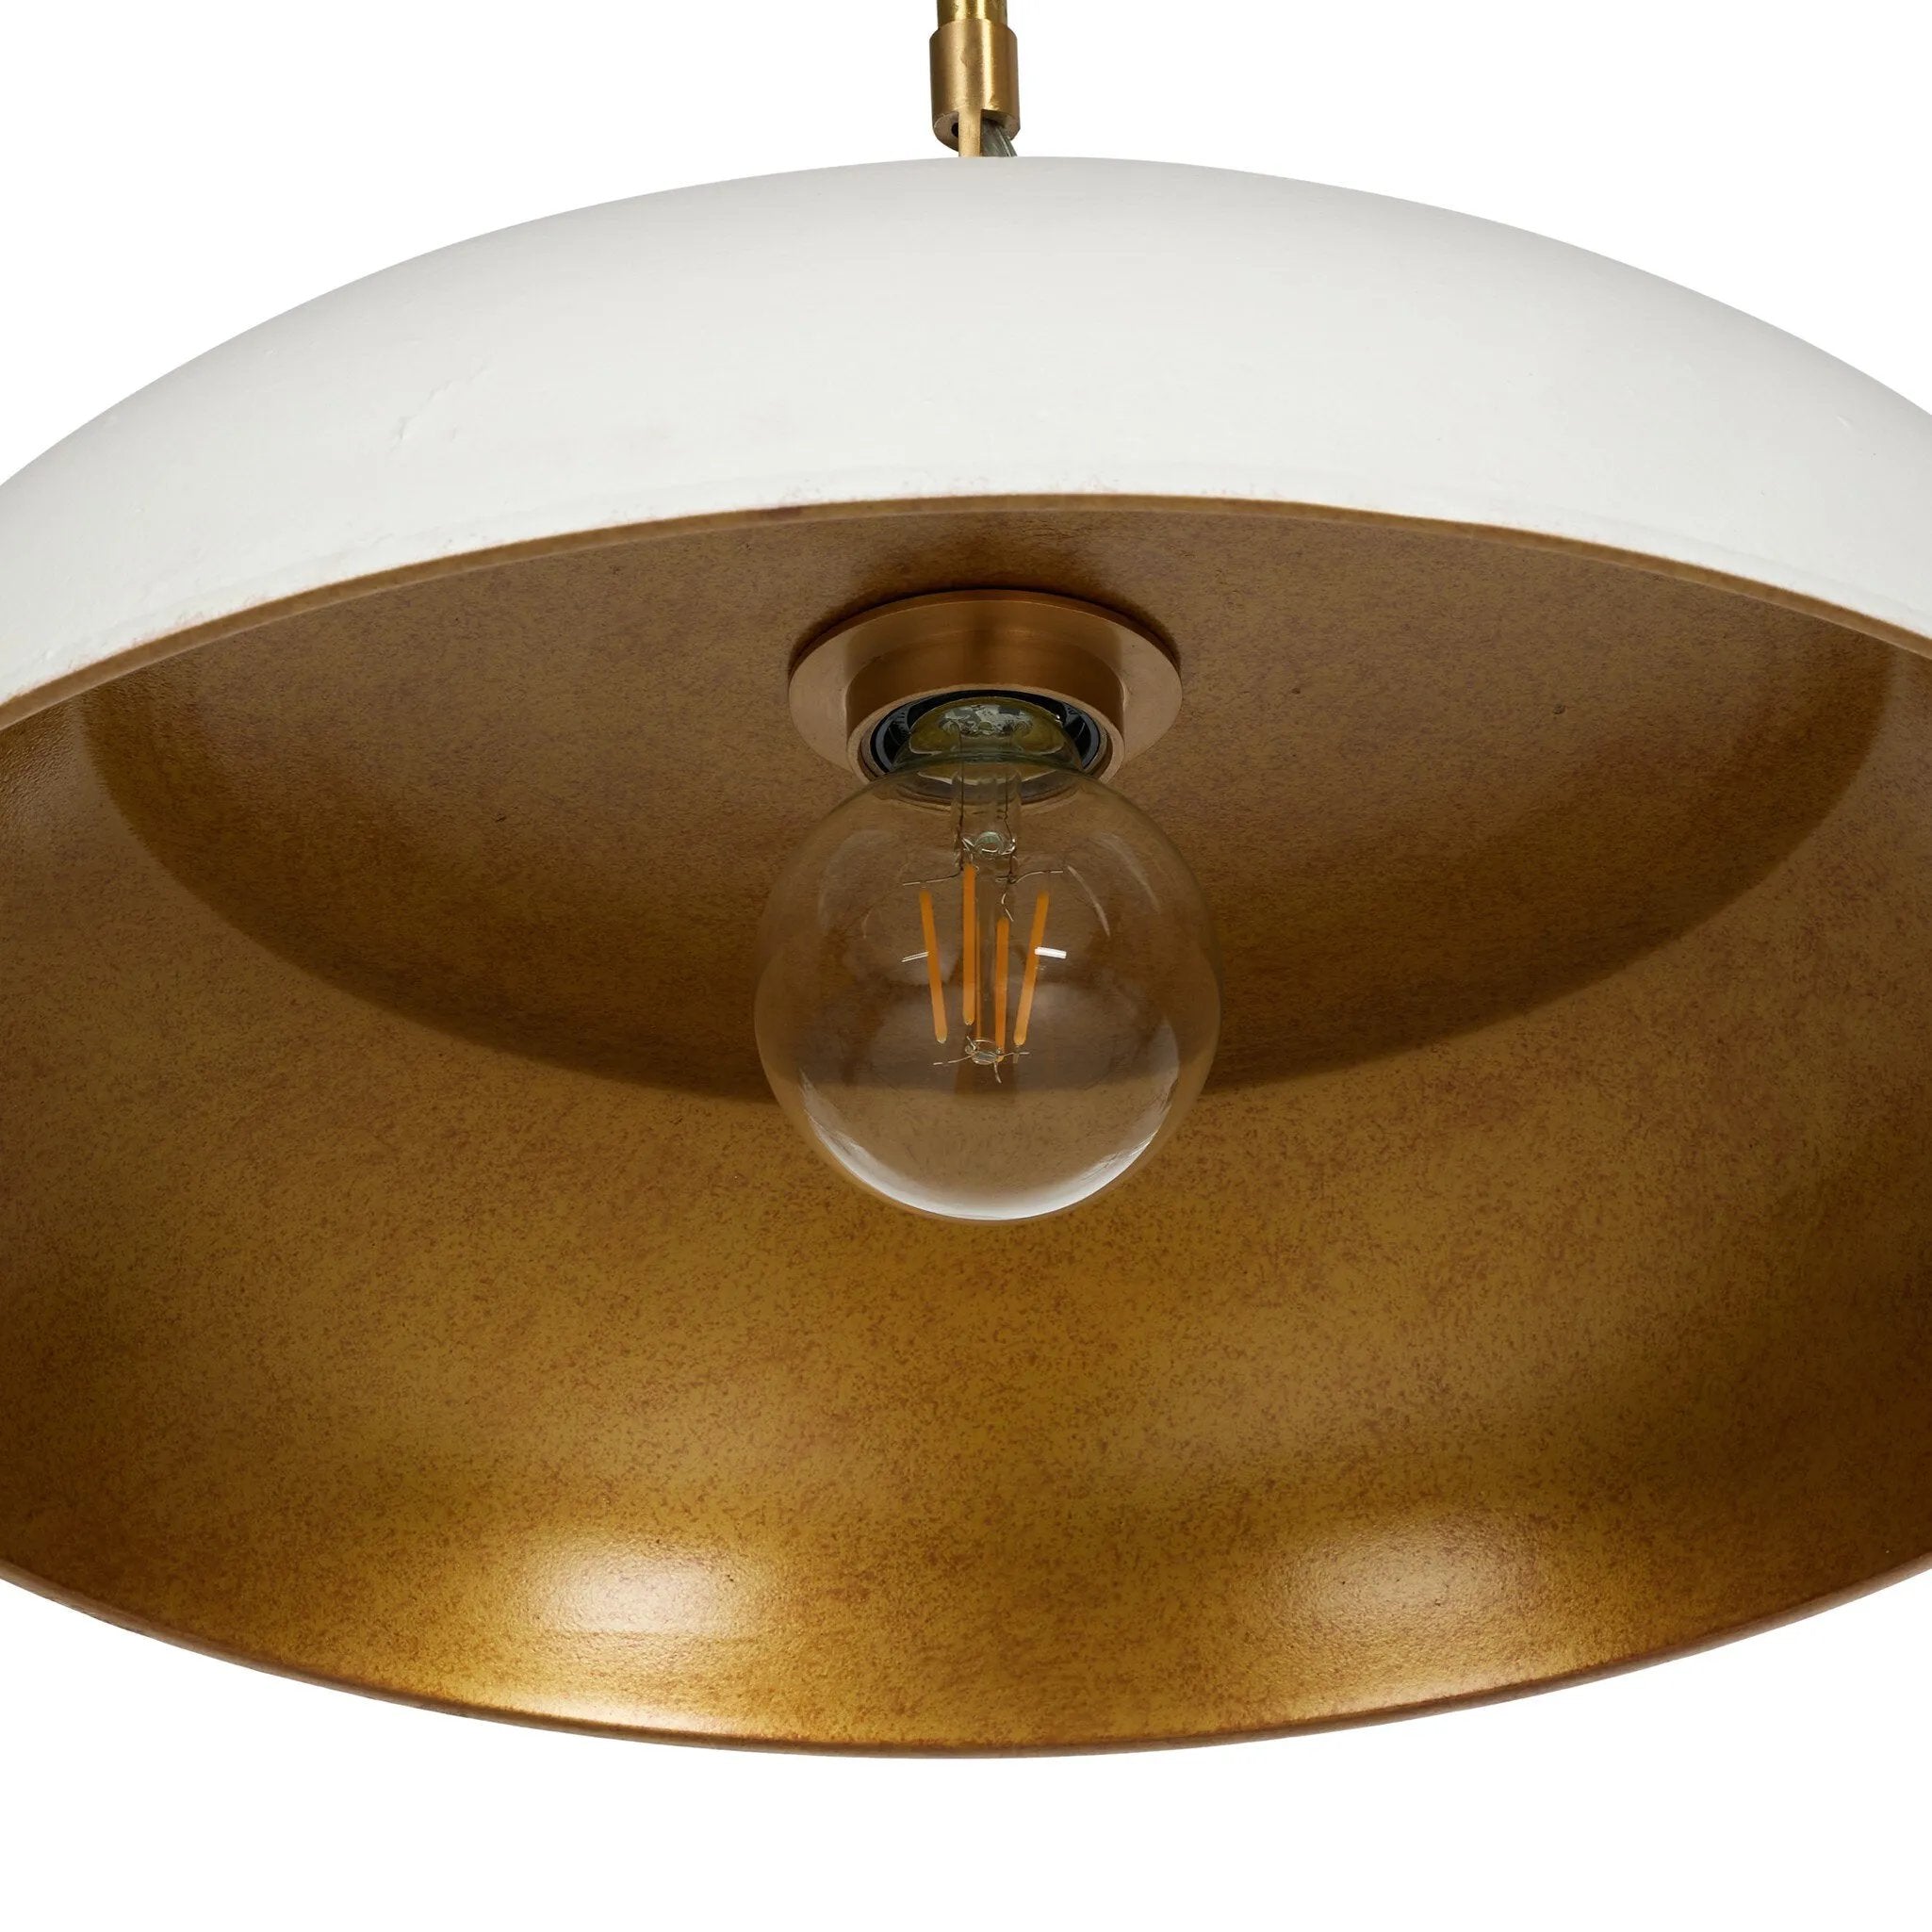 Low-profile pendant light with wide cast aluminum shade in a white textured finish. Gold leaf interior reflects to emit a warm, inviting glow that meets vintage inspiration and modern simplicity.Collection: Dan Amethyst Home provides interior design, new home construction design consulting, vintage area rugs, and lighting in the Austin metro area.